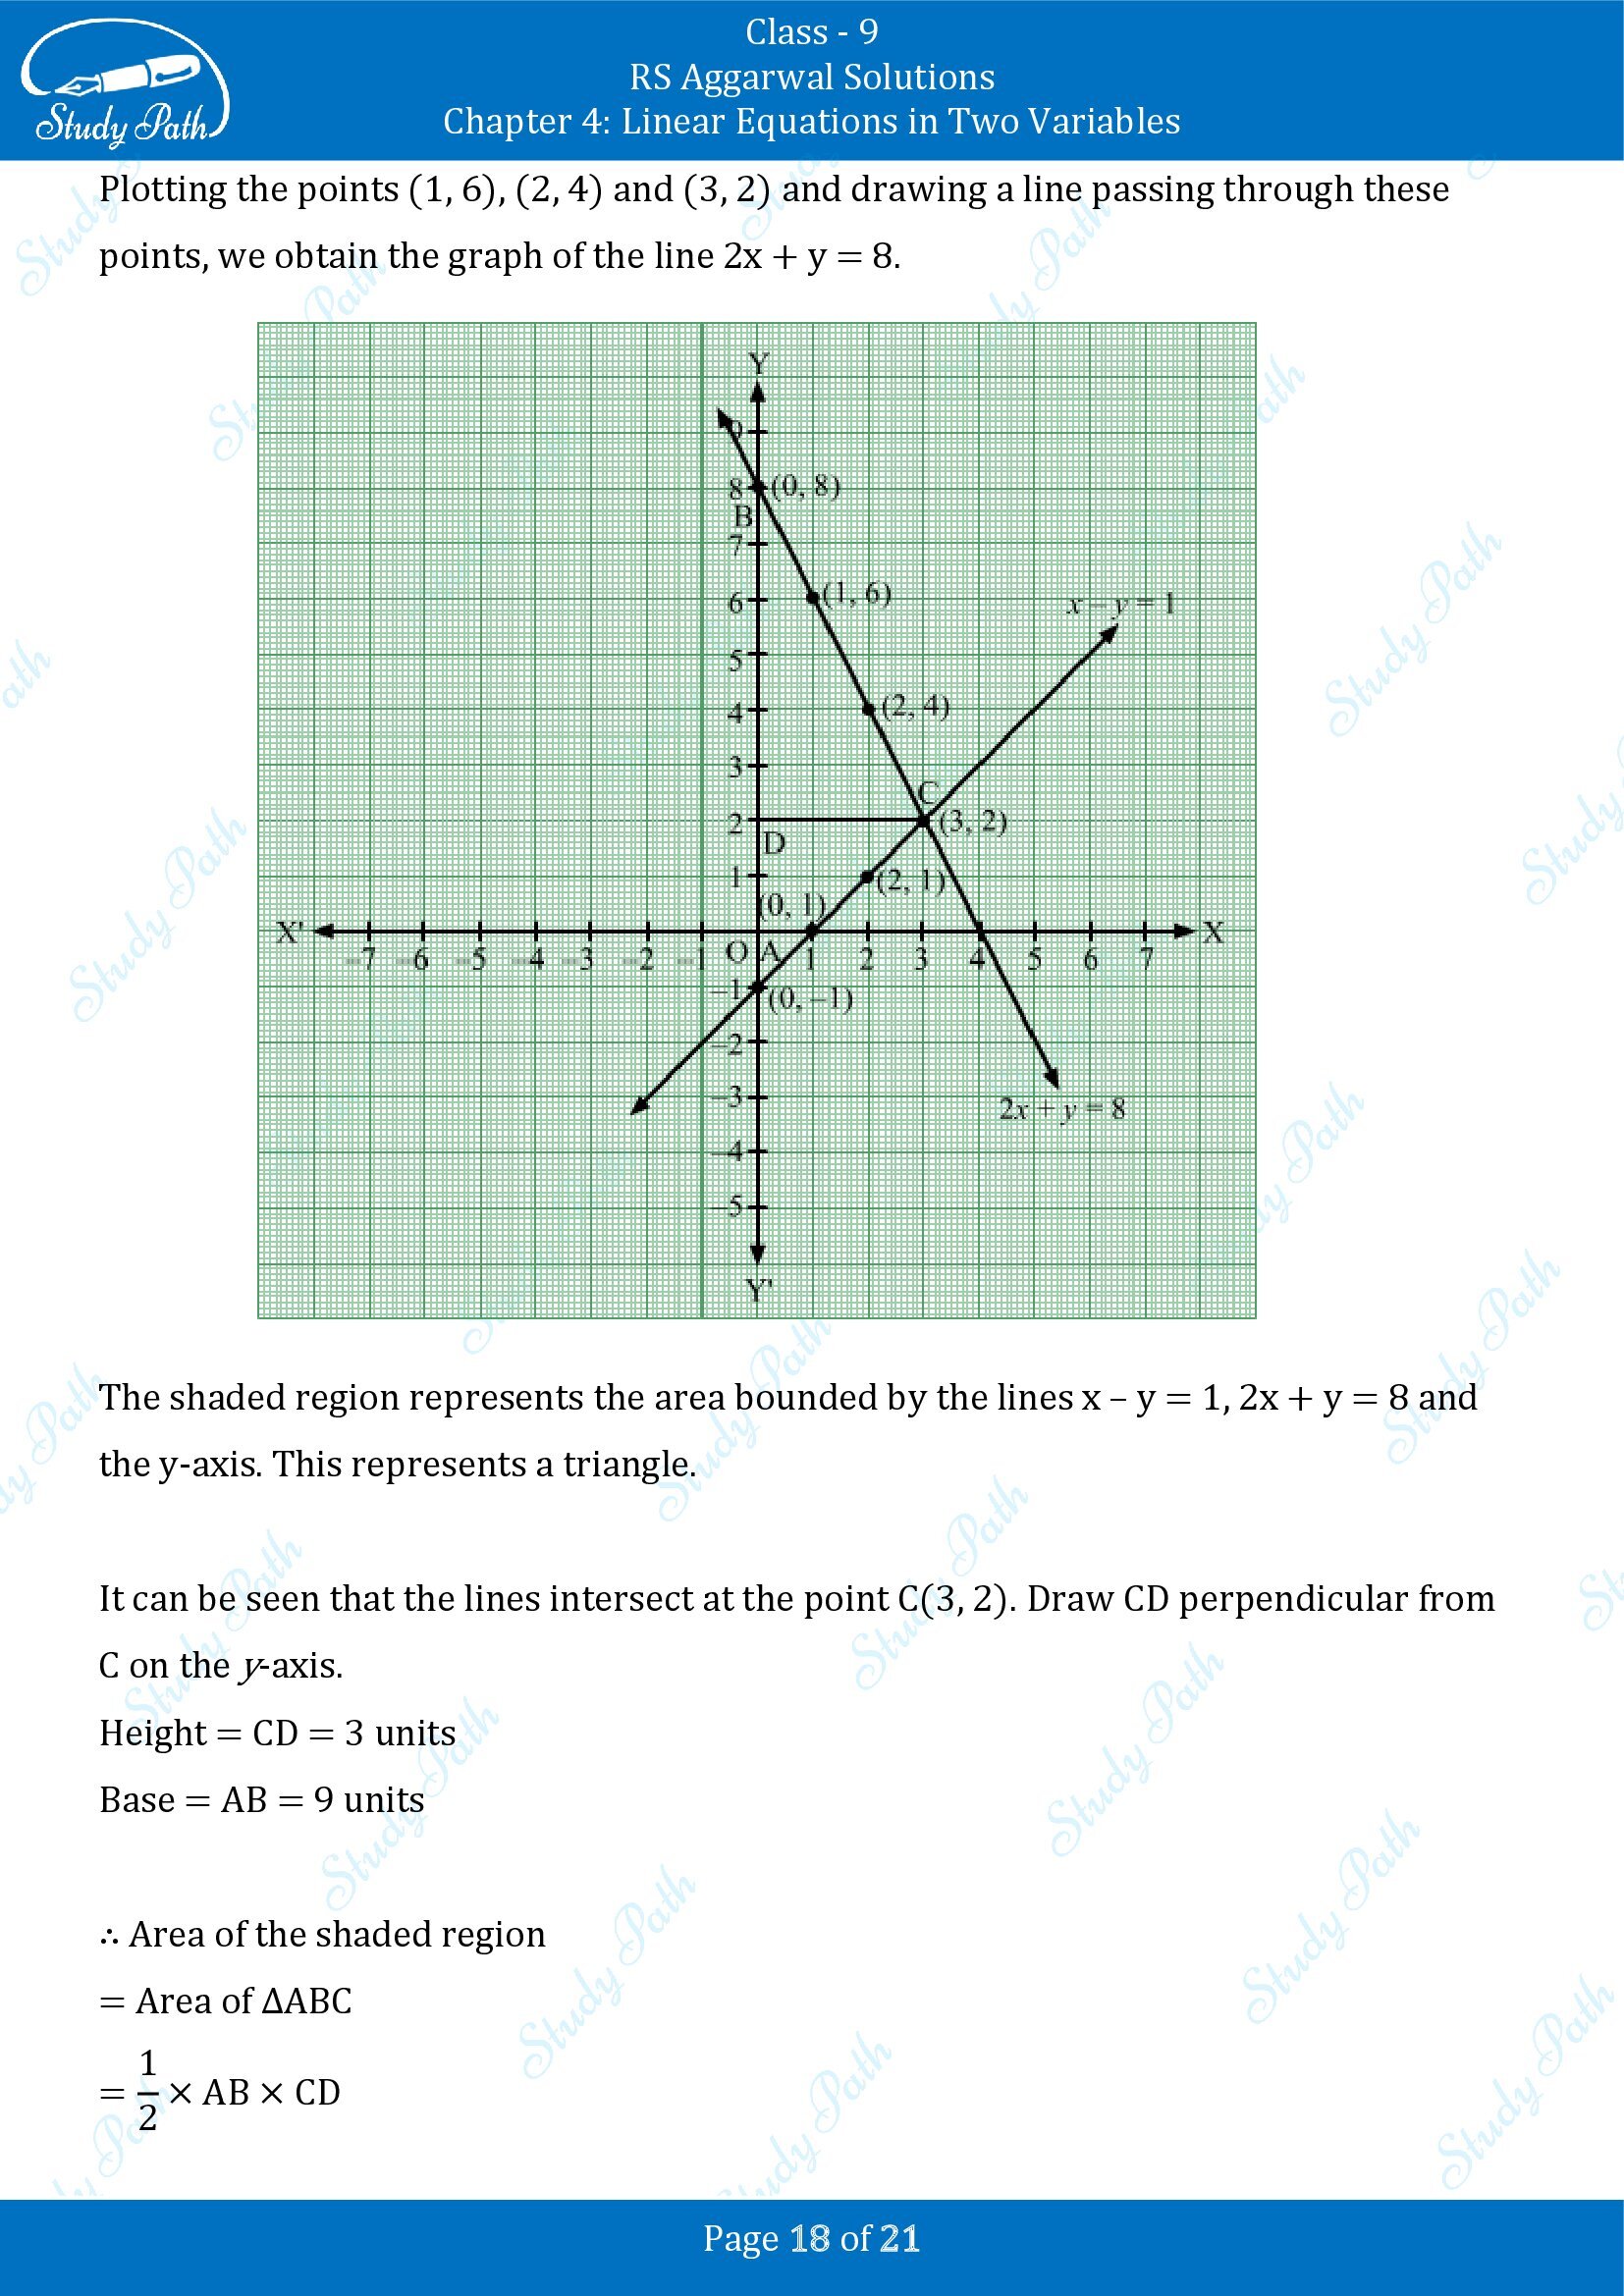 RS Aggarwal Solutions Class 9 Chapter 4 Linear Equations in Two Variables Exercise 4B 00018